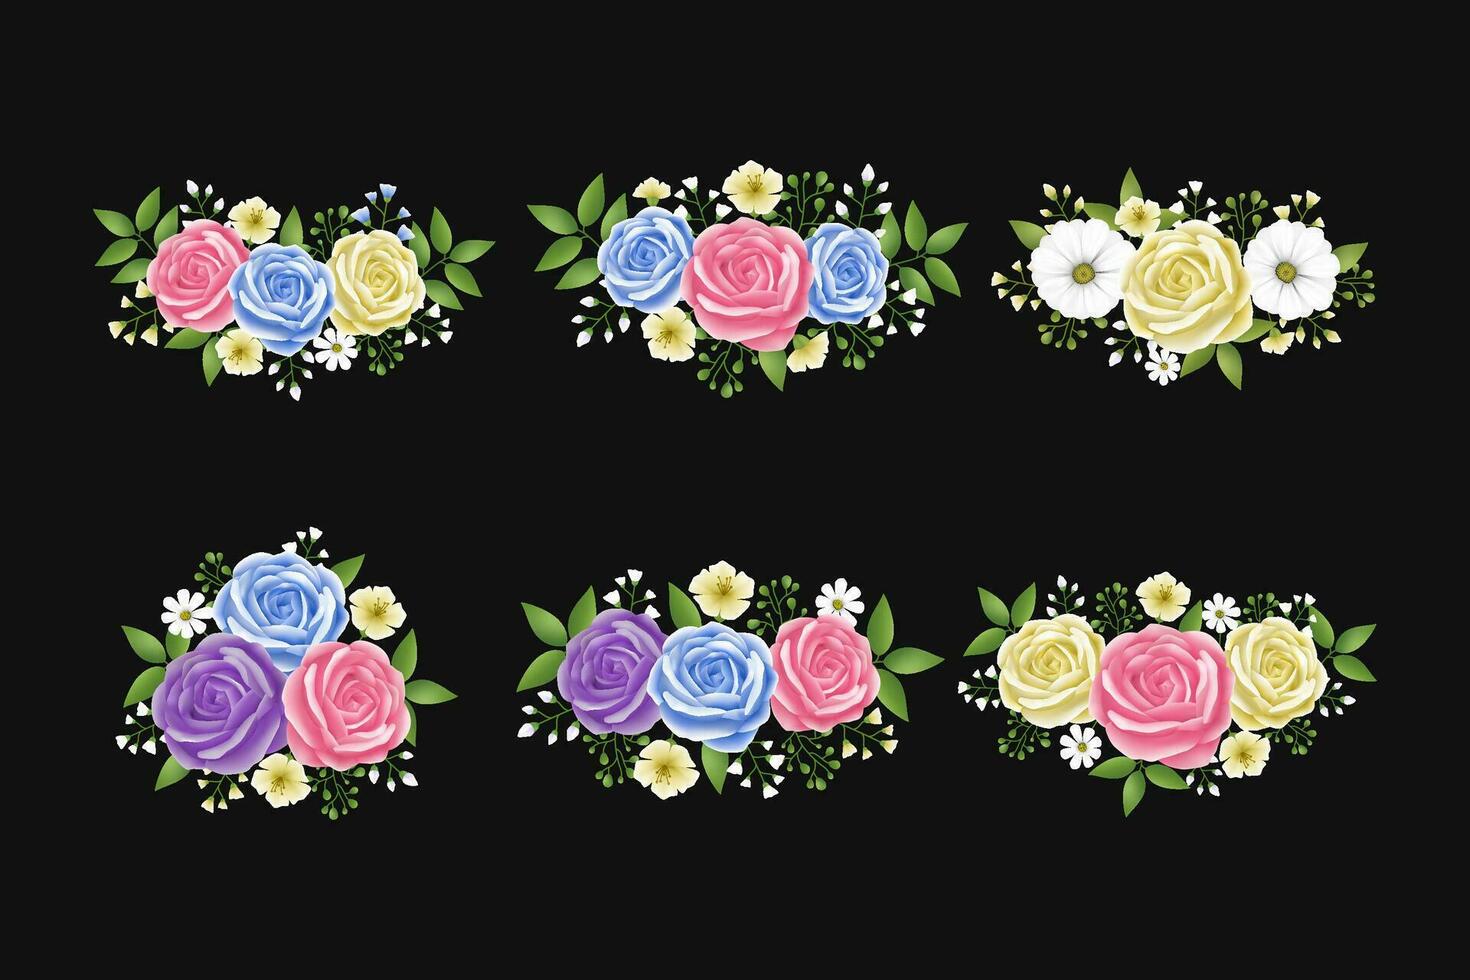 Roses flowers leaves garland with cyan, beige, pink and purple color set. Floral hand drawn for bouquets, wreaths, arrangements, wedding invitations, anniversary vector